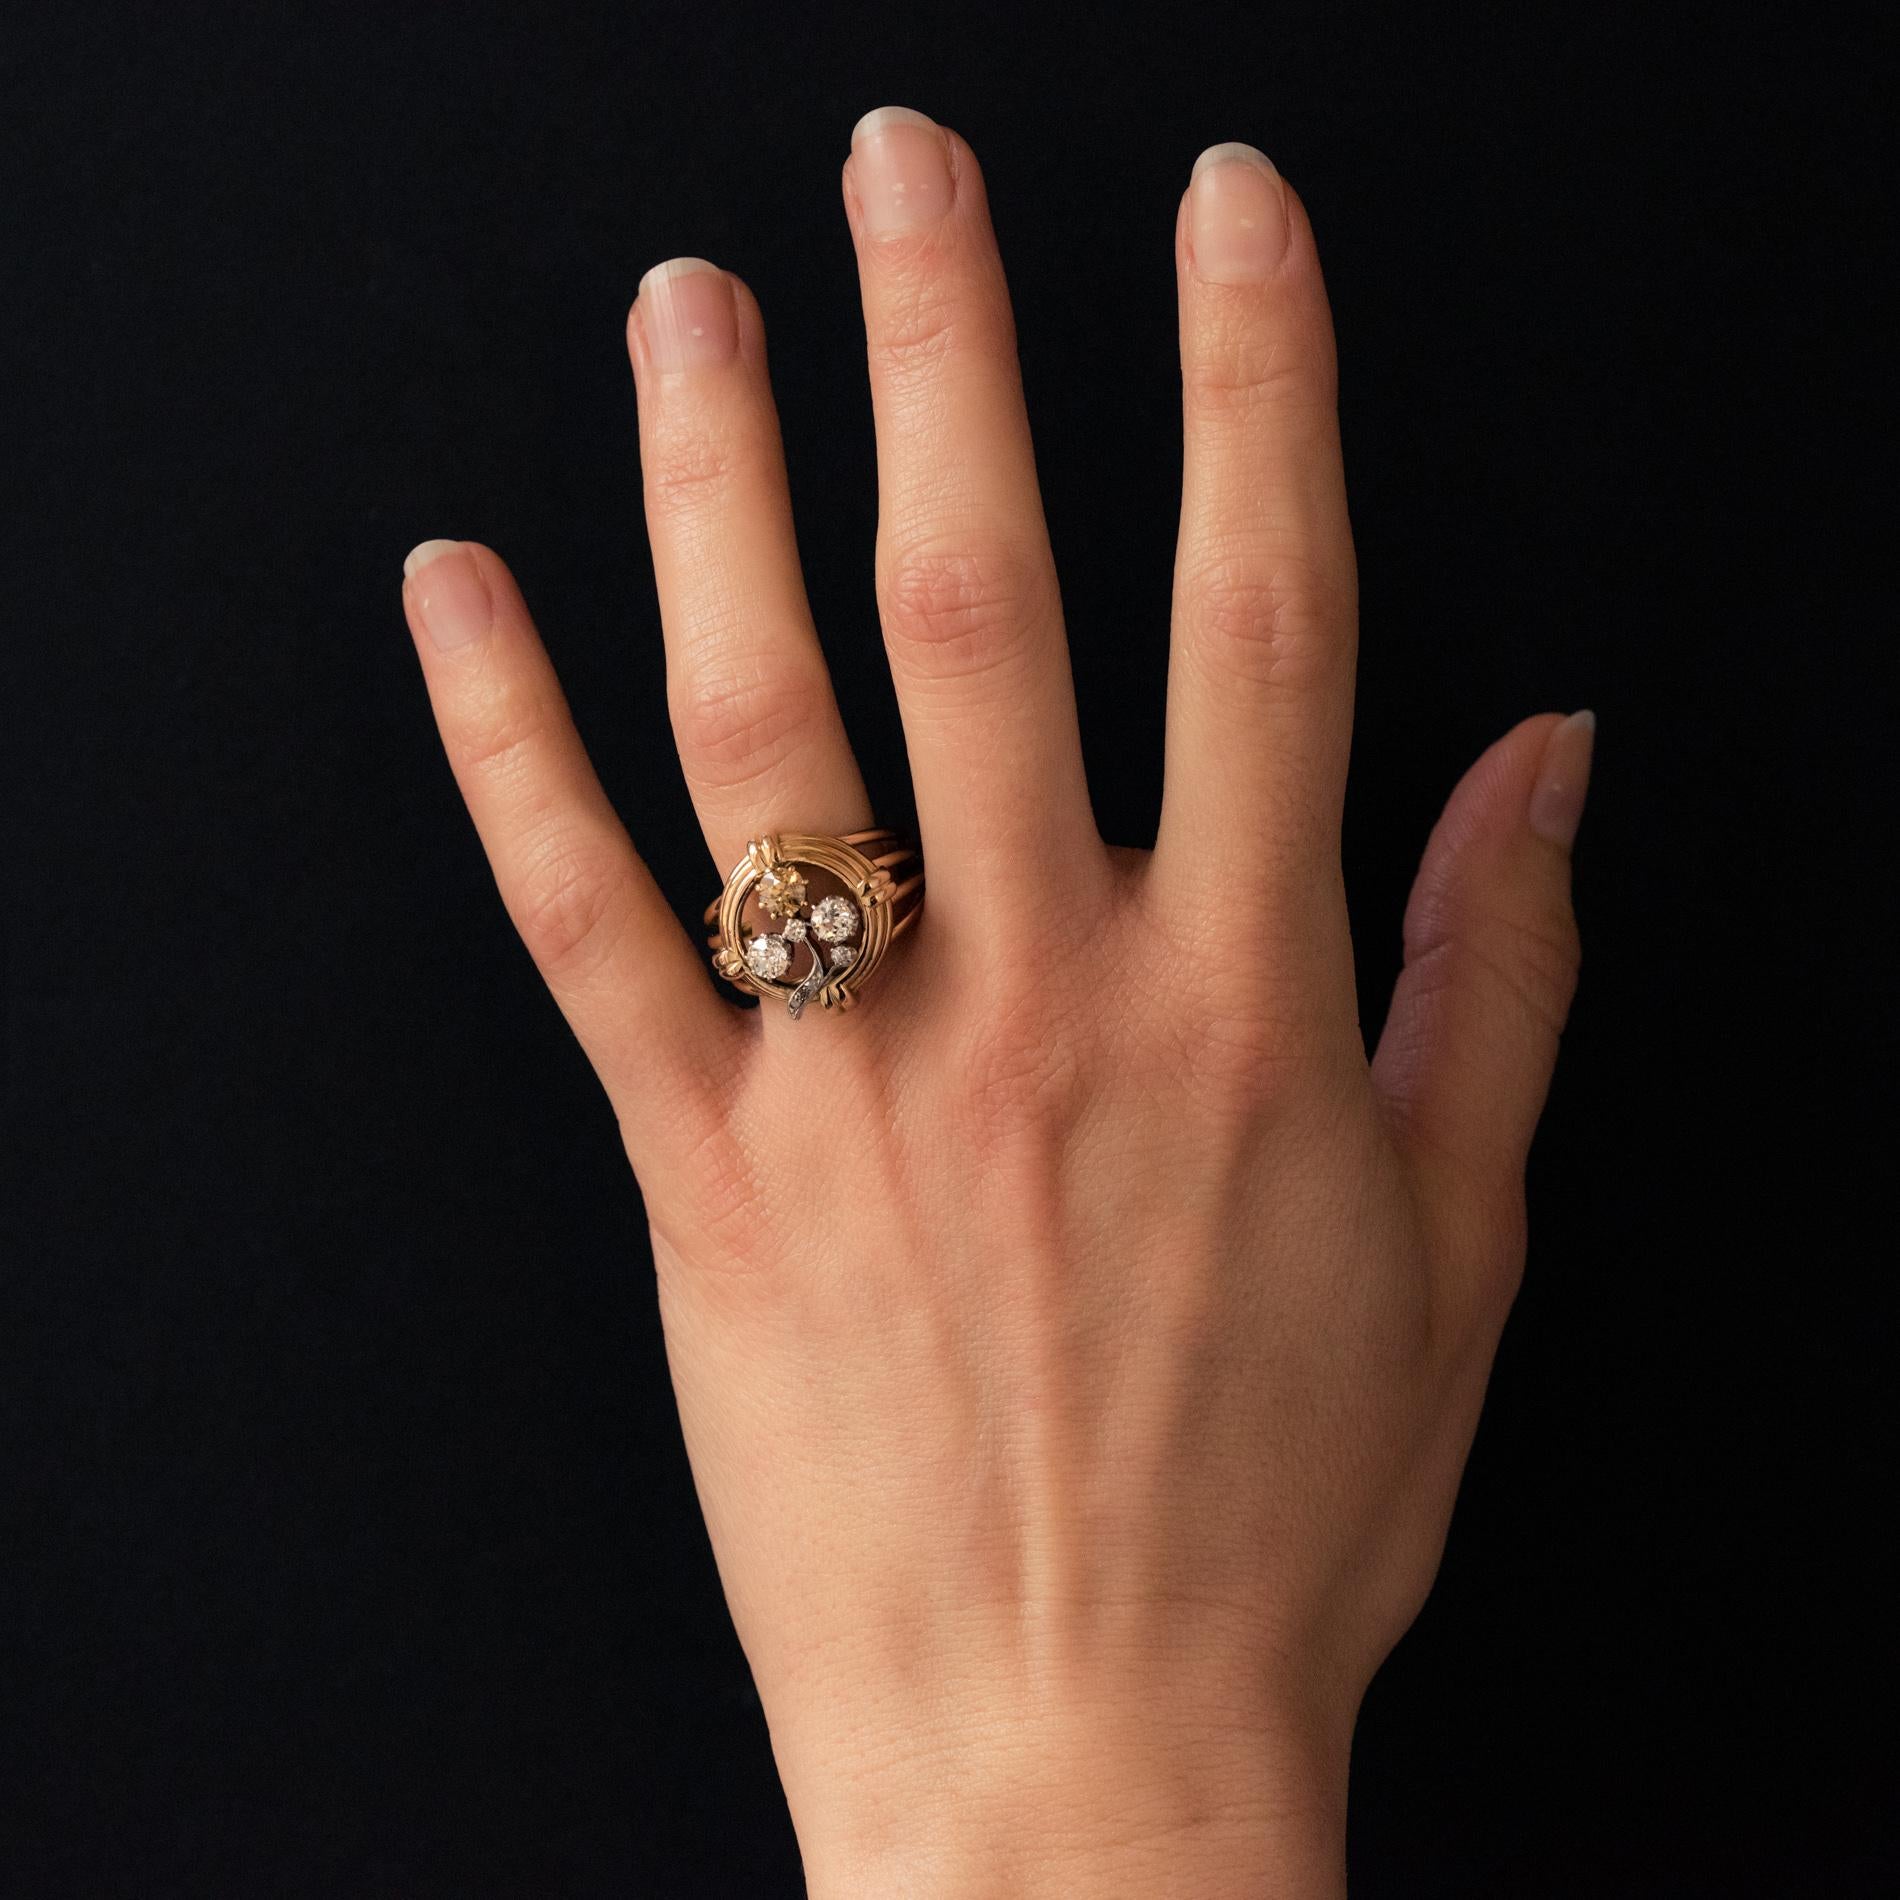 Ring in 18 karat yellow gold.
The top of this splendid antique ring represents a clover whose leaves and foliage are set with antique-cut diamonds, white and a beautiful cognac diamond. The entire periphery is made up of gold threads held at the